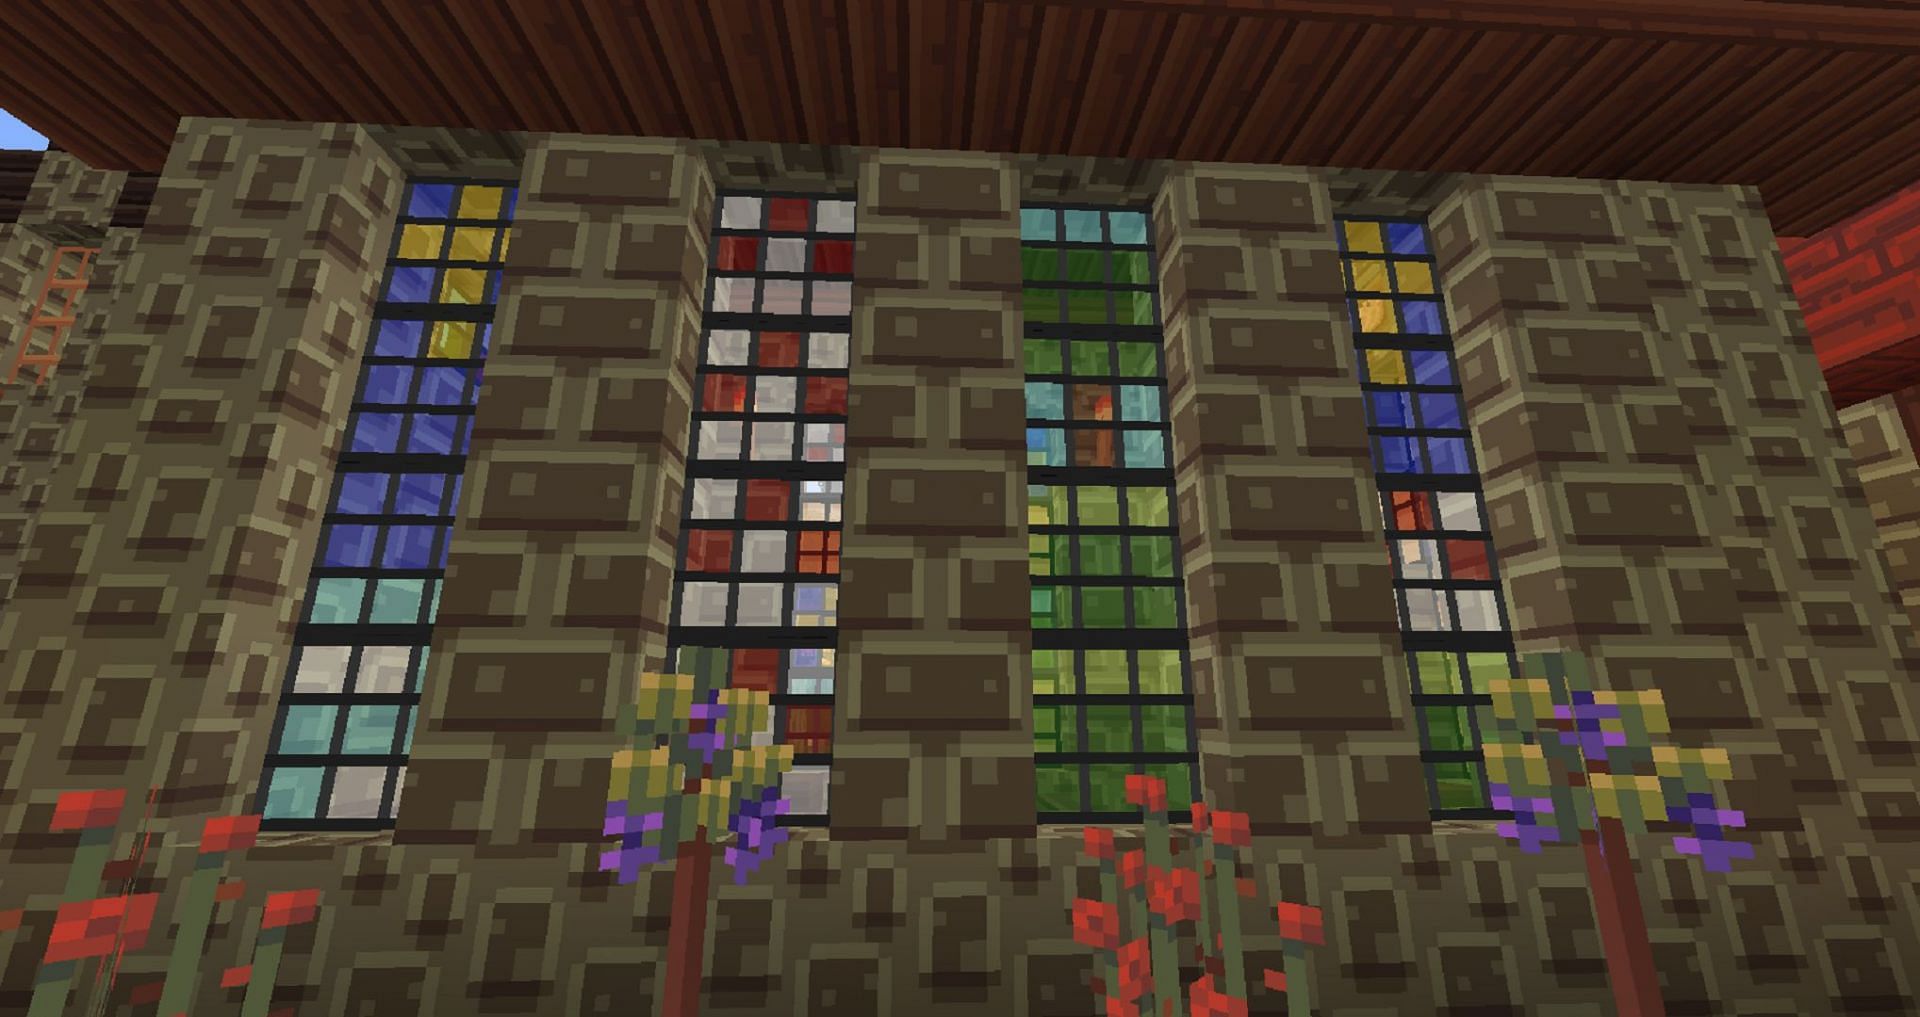 Patterns of stained glass (Image via Minecraft Forum)